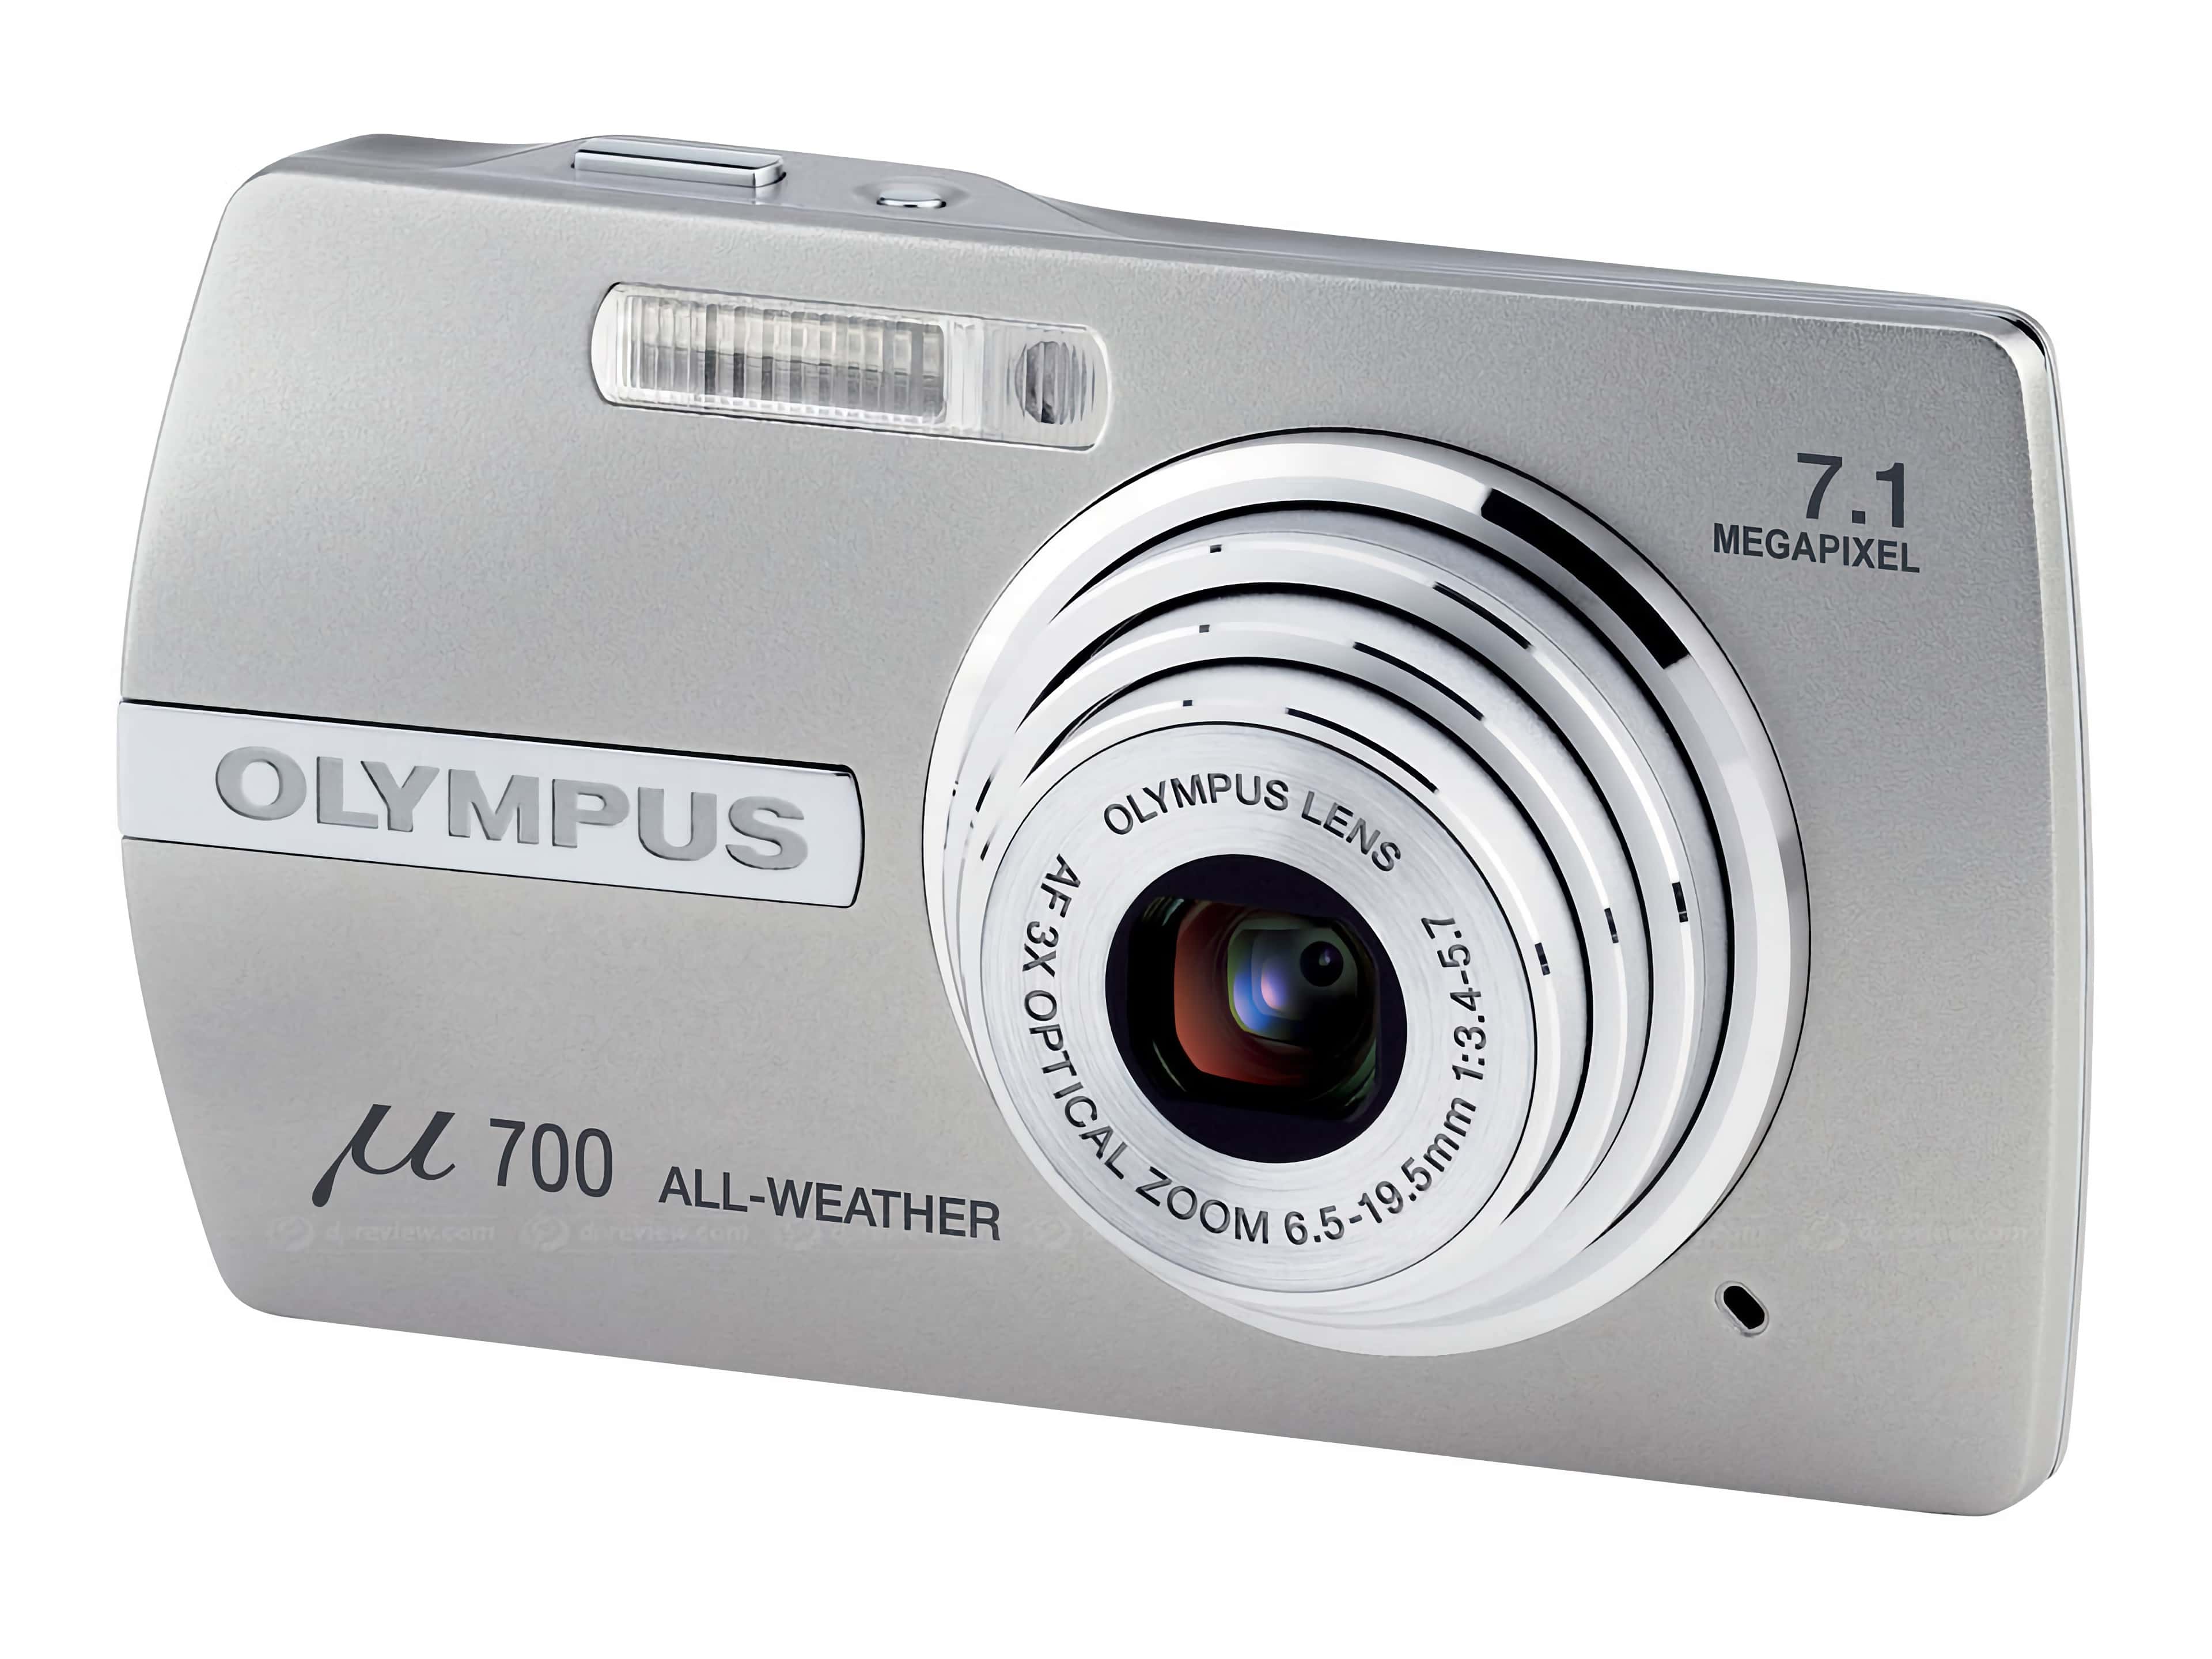 I believe this is an Olympus-supplied photo, republished at DPReview